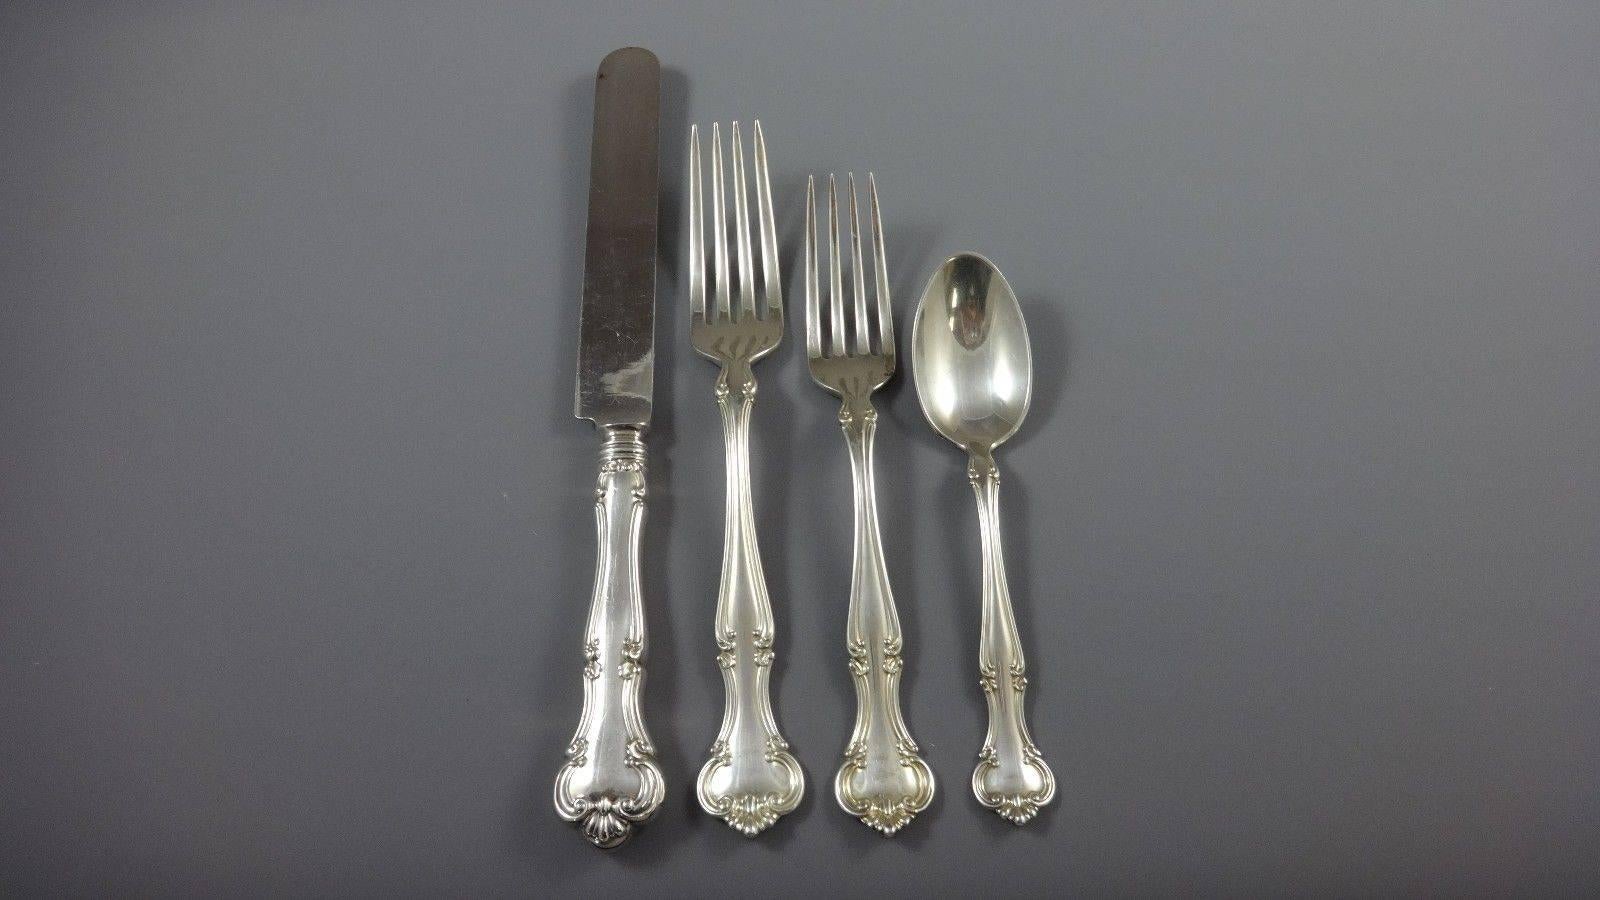 Cromwell by Gorham sterling silver dinner size flatware set, introduced in the year 1900. The classic design is timeless. This 60 piece set includes:

12 dinner size knives, 9 1/2